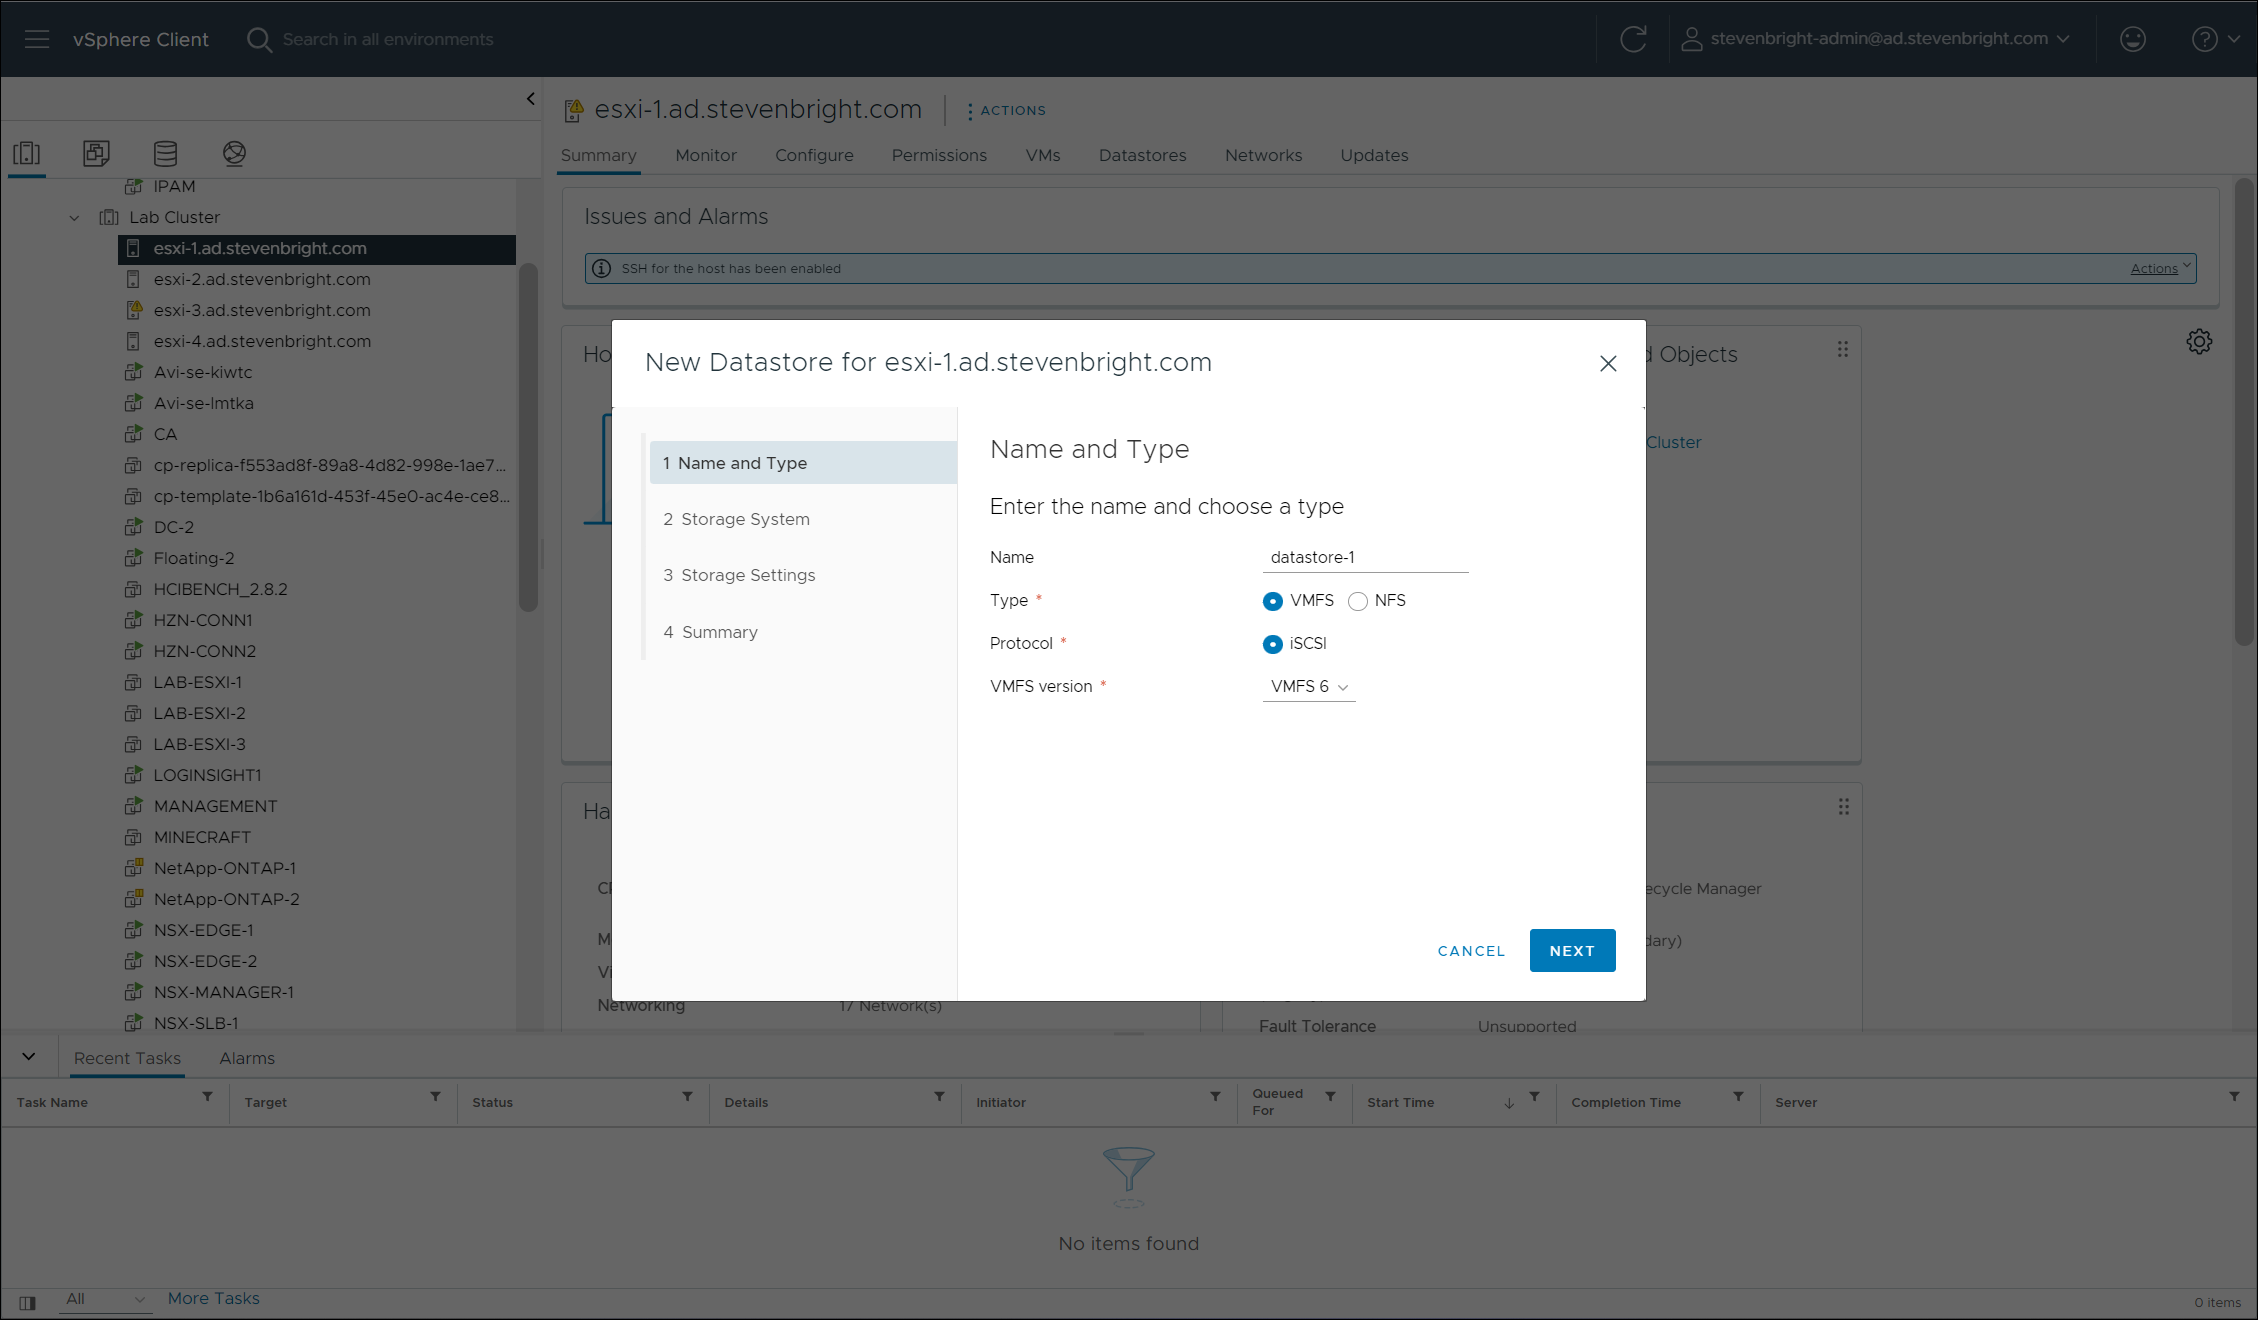 VMware vSphere Client - Synology Storage Console Optimize - New Datastore Wizard - Step 1